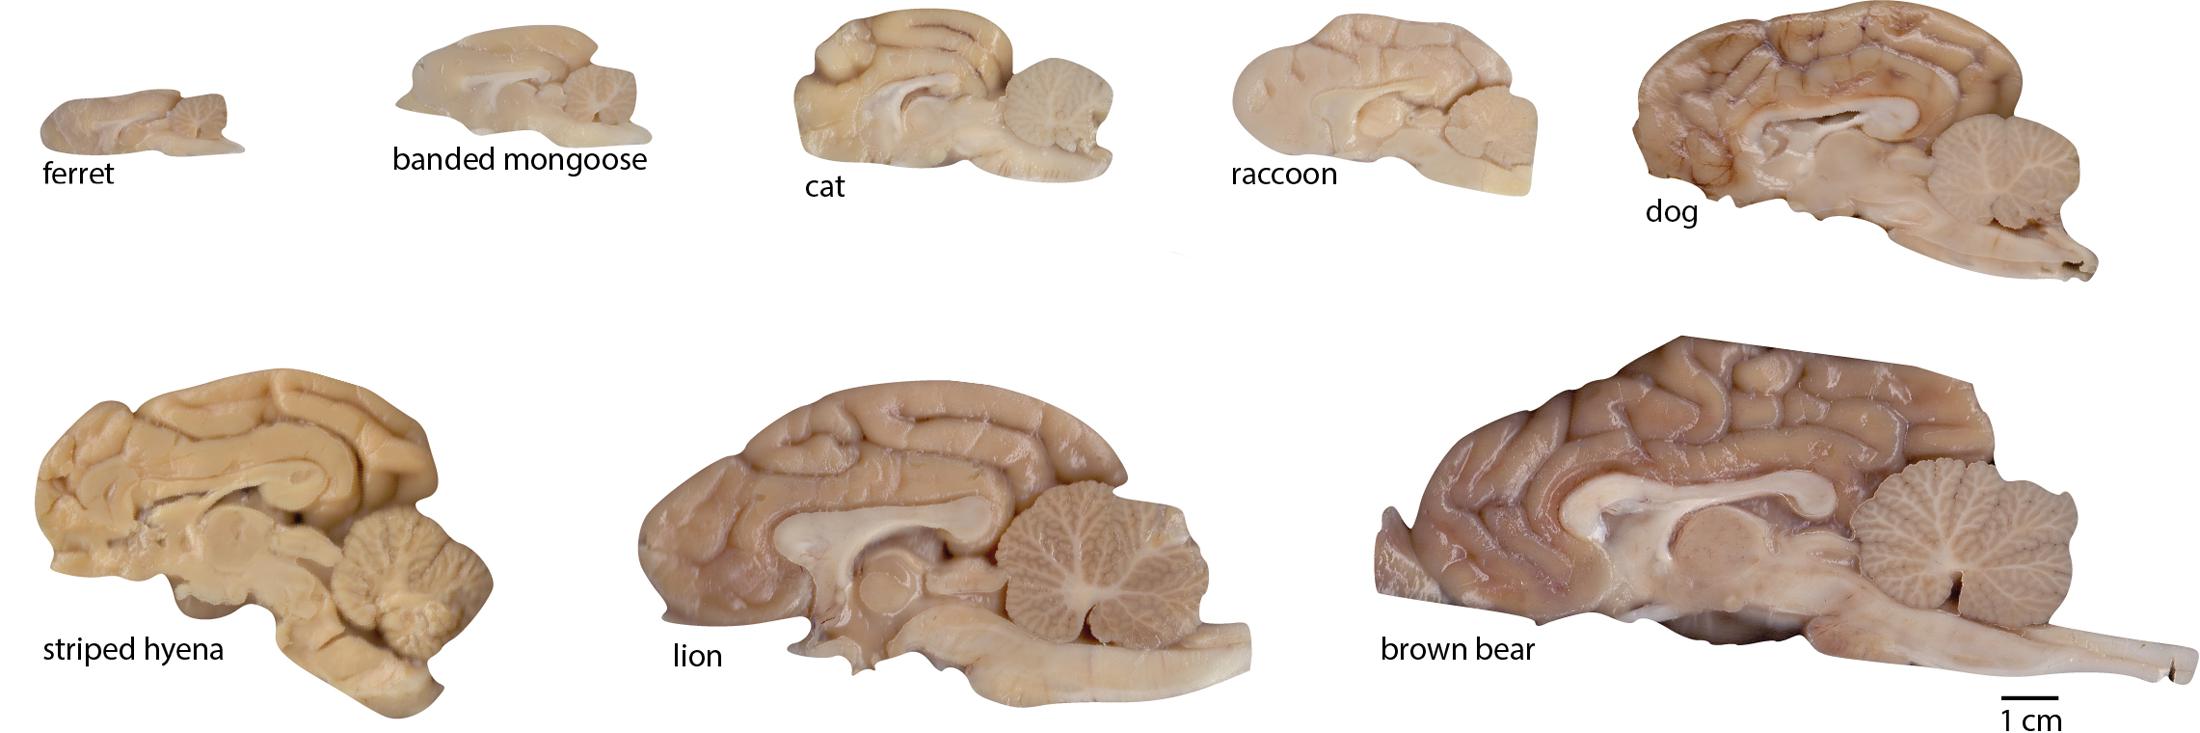 what dog has the largest brain